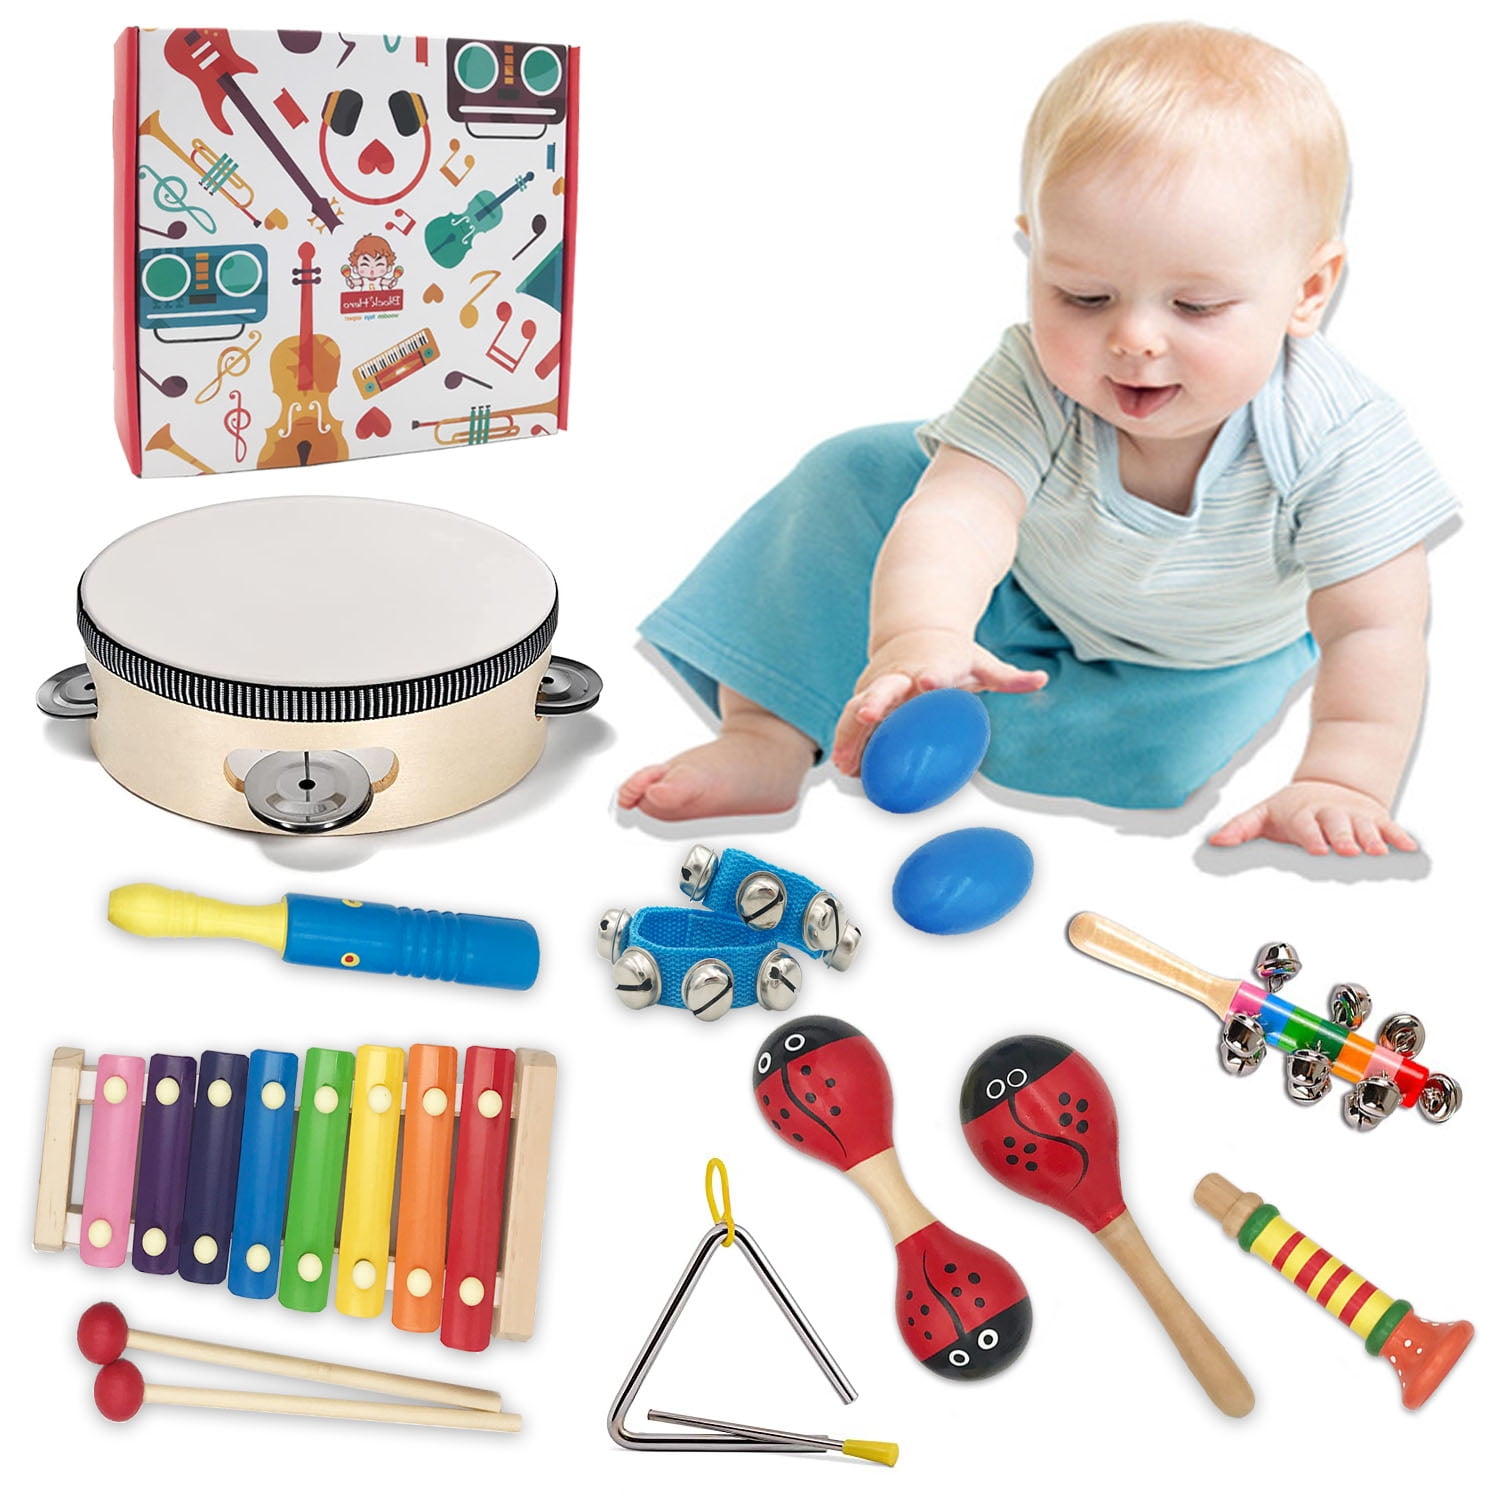 Kids Baby's Plastic Roll Drum Musical Instrument Toy w/ Microphone Gift 